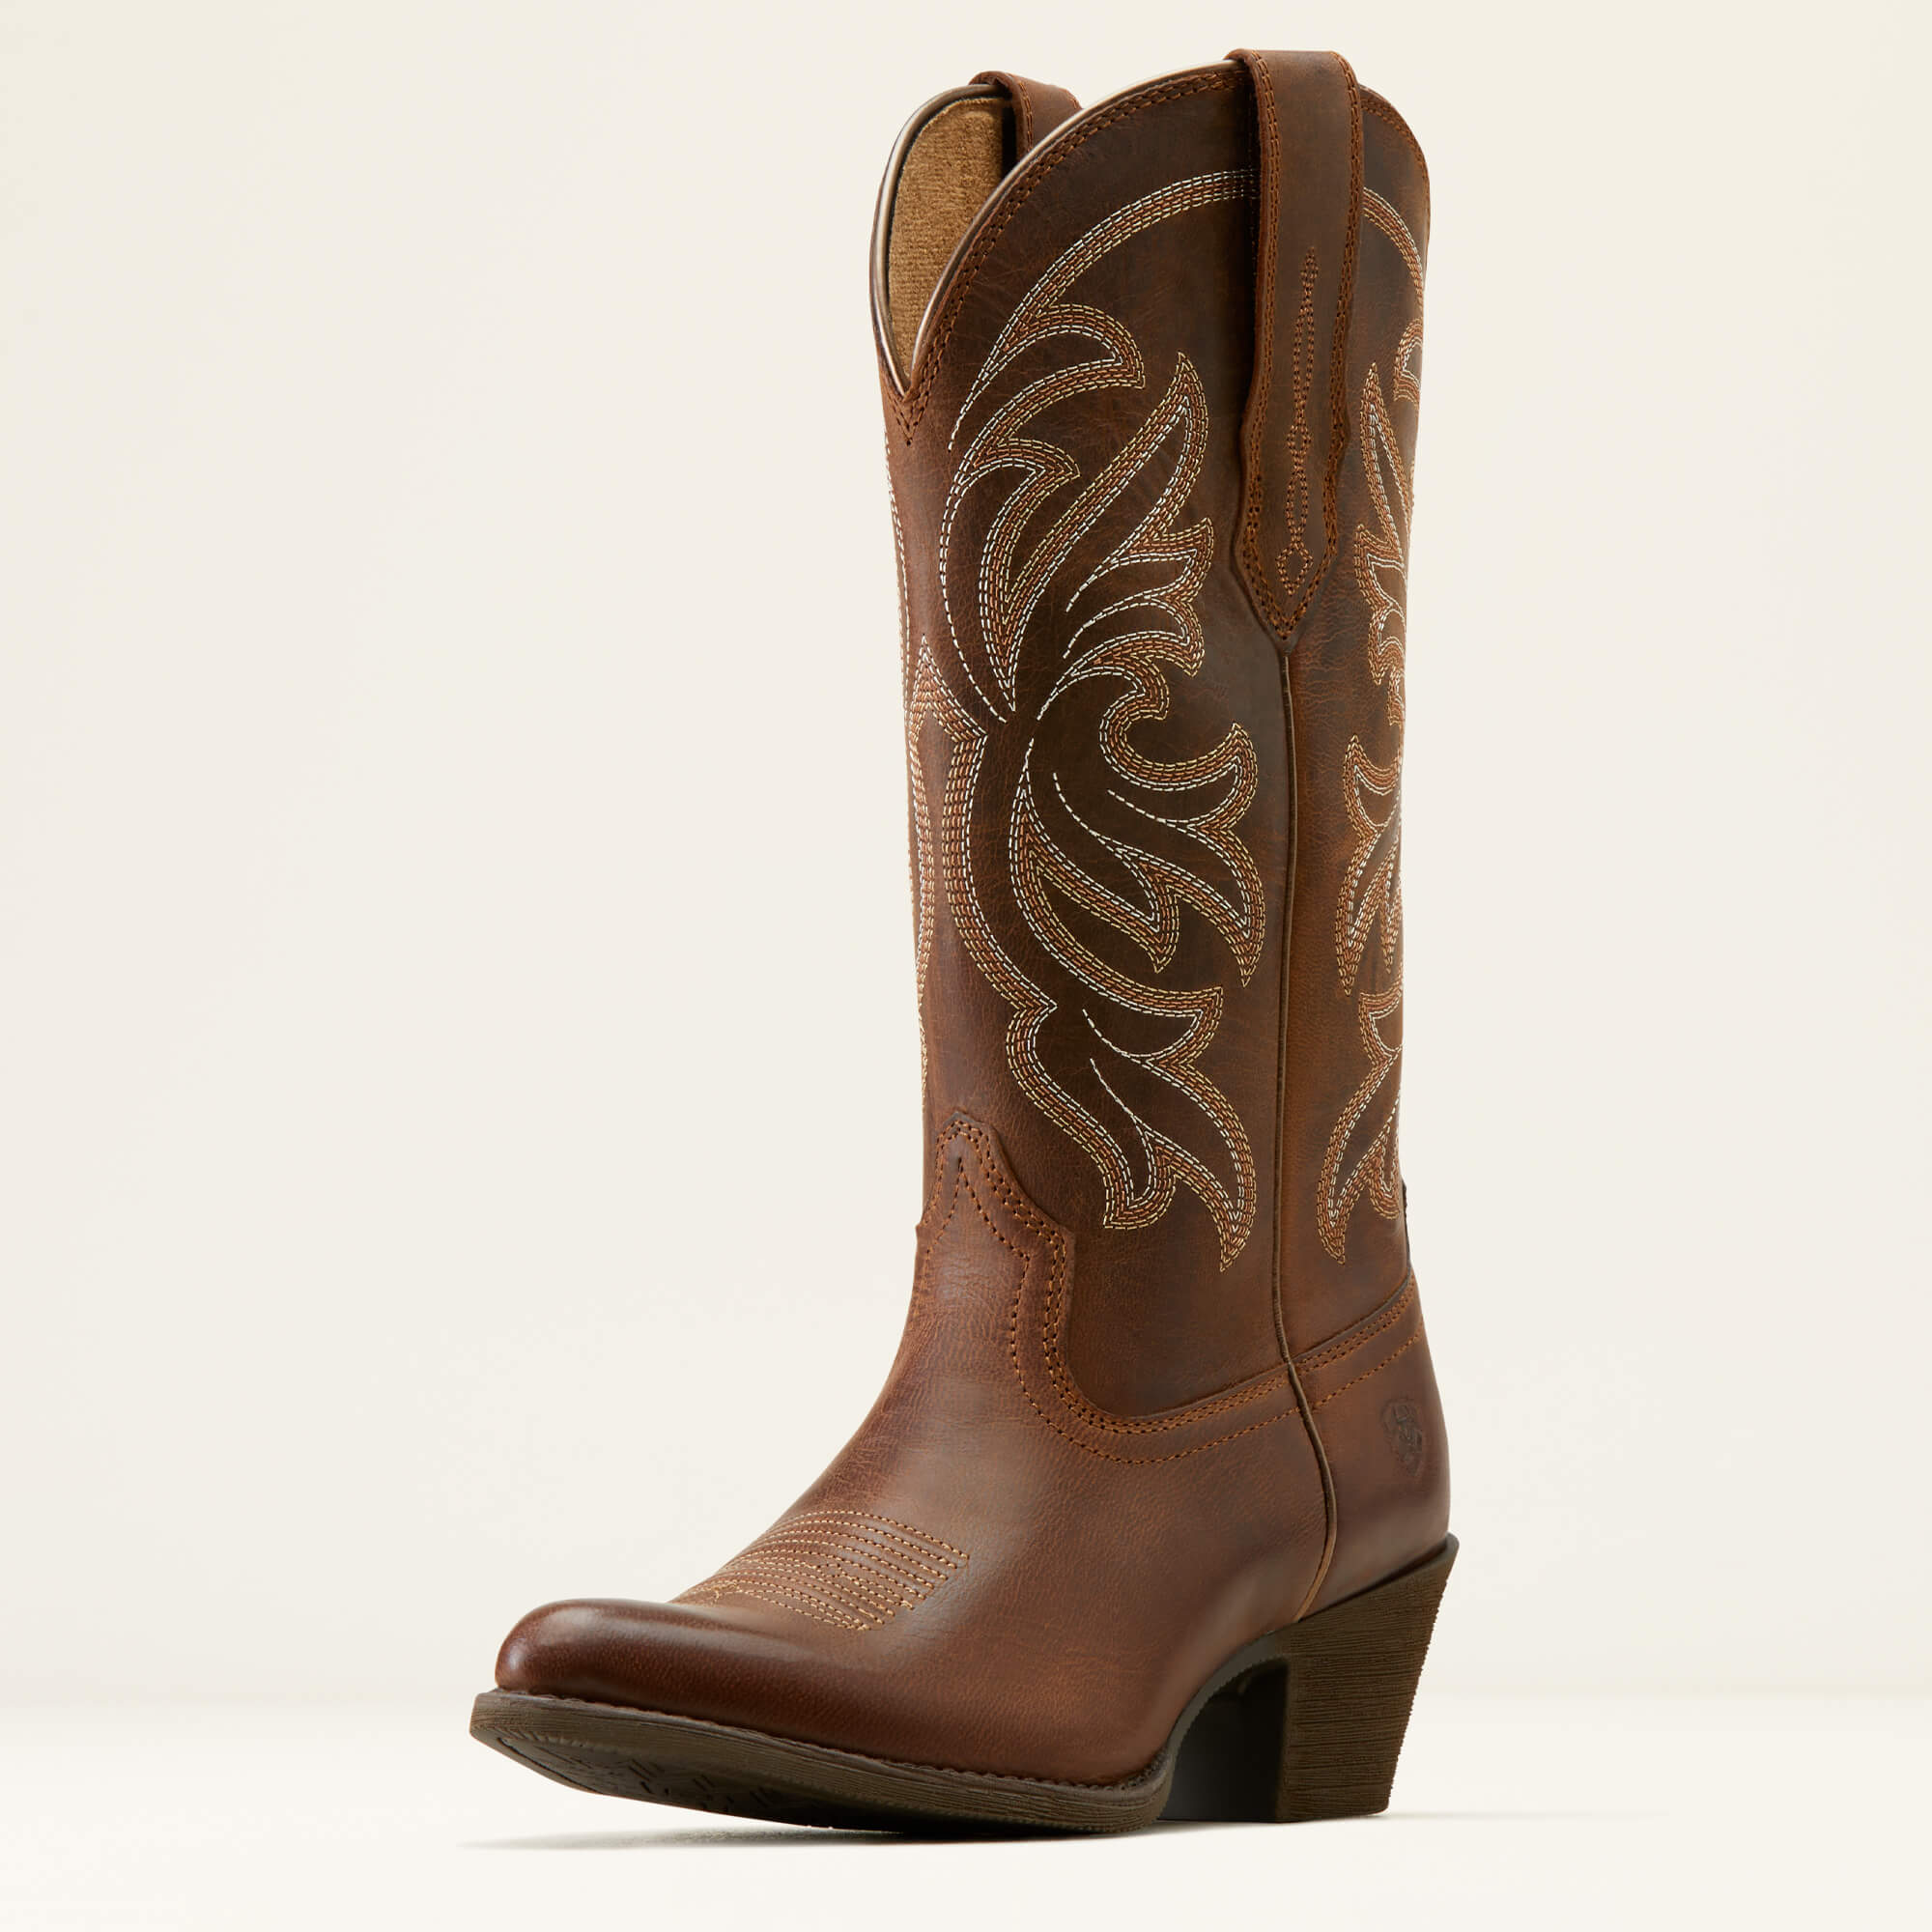 ARIAT Heritage J Toe Stretchfit Western Boots - Womens Cowgirl - Sassy Brown